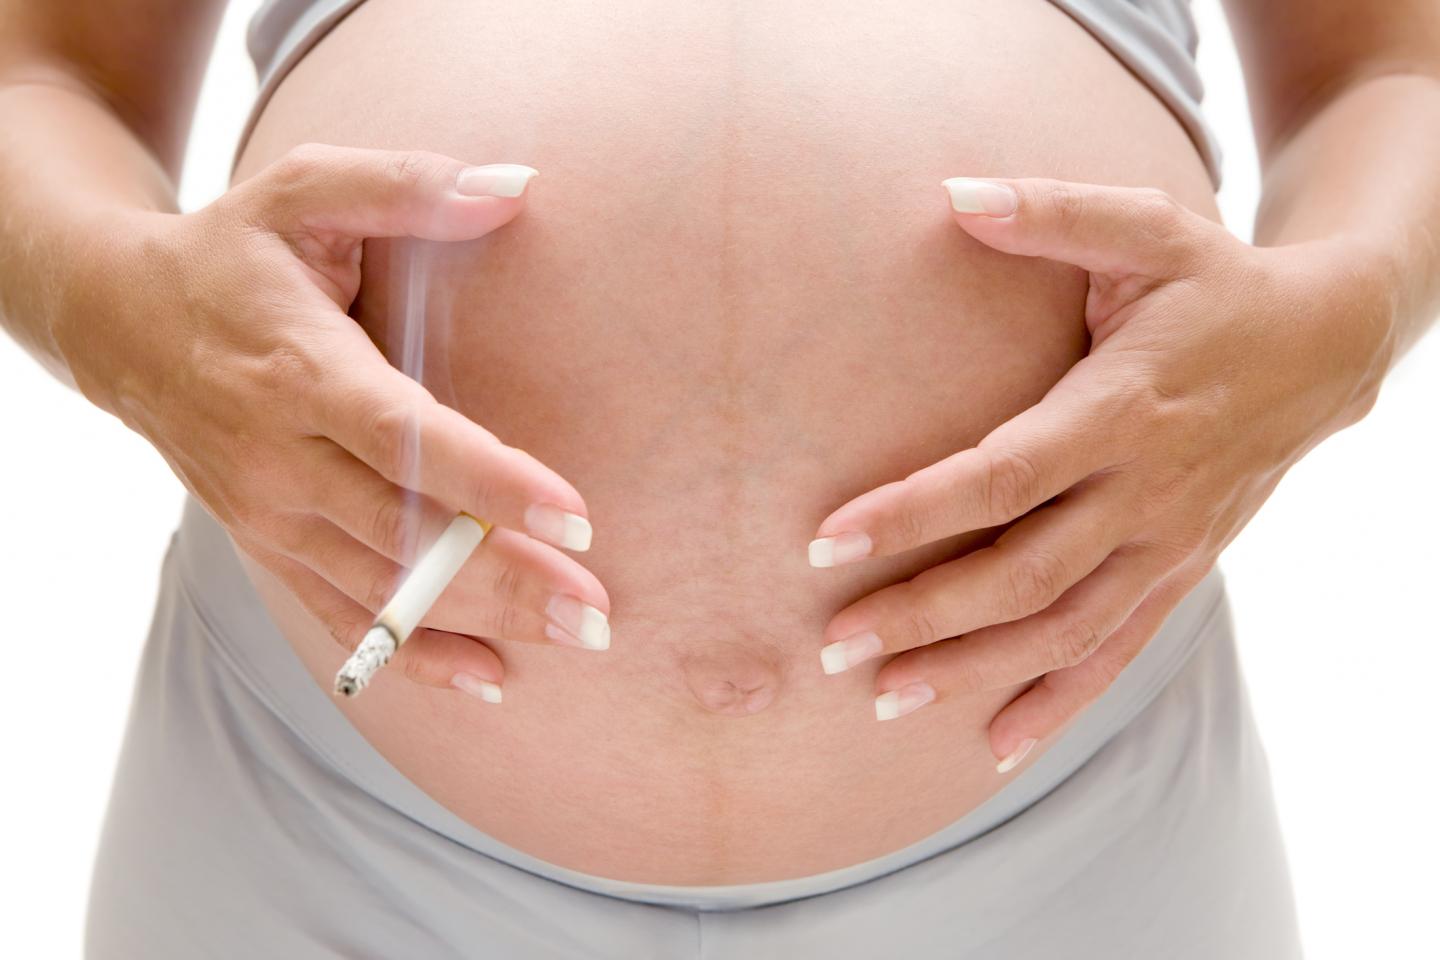 Vitamin C and Infant's Lung in Pregnant Women